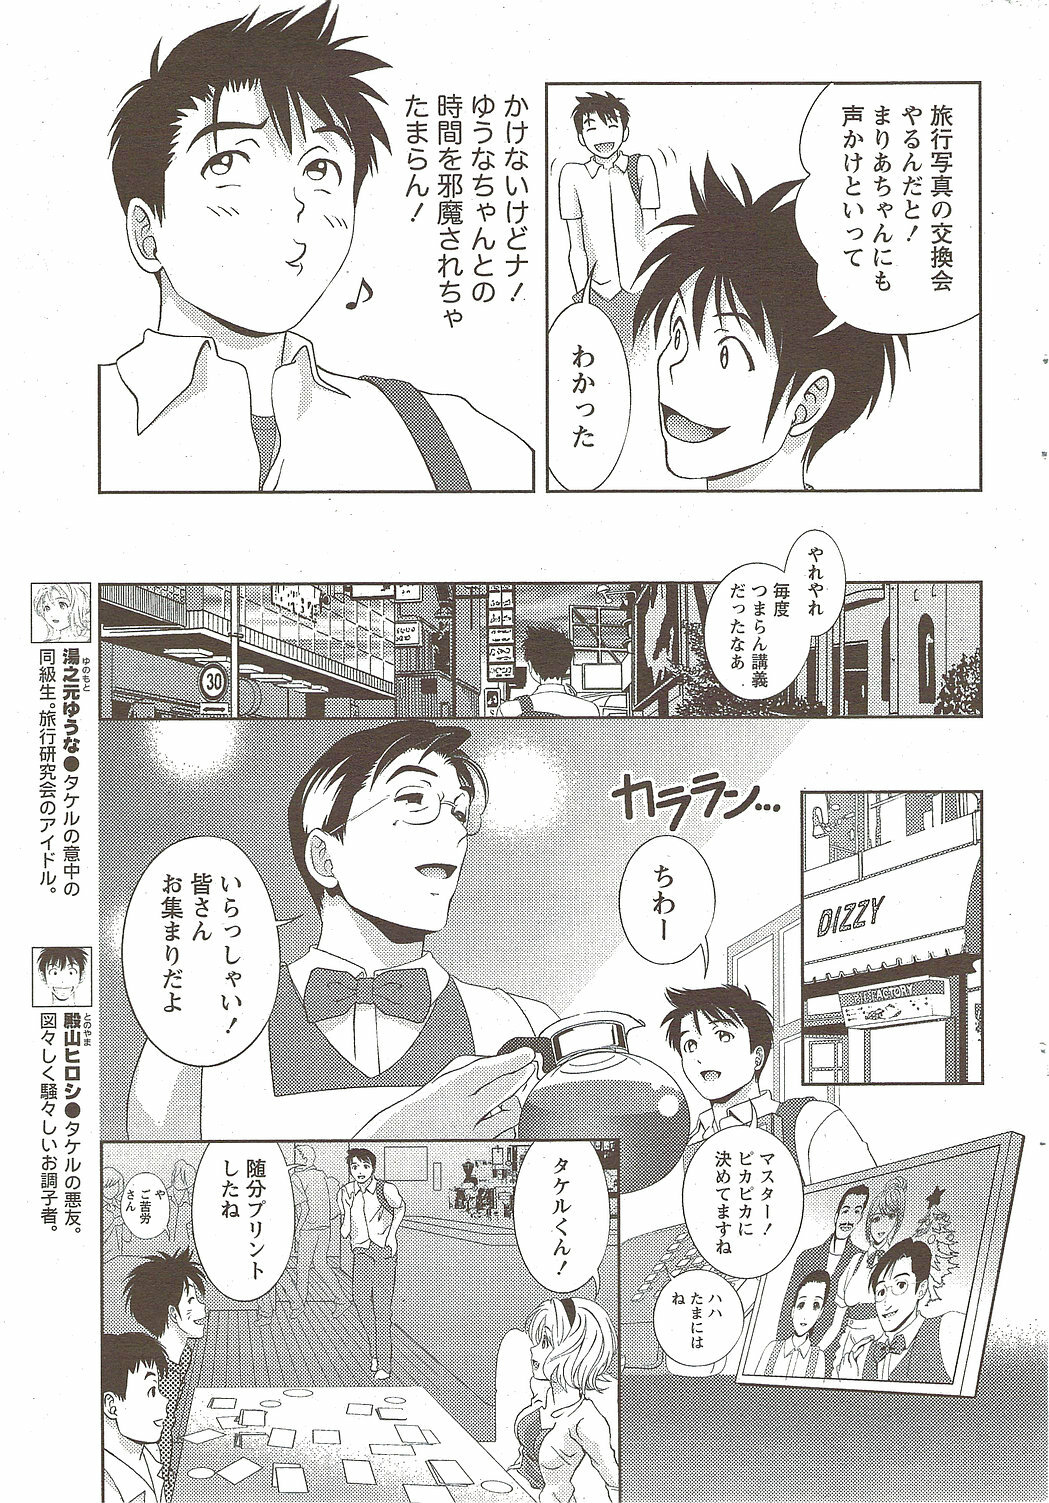 Monthly Vitaman 2009-12 page 33 full